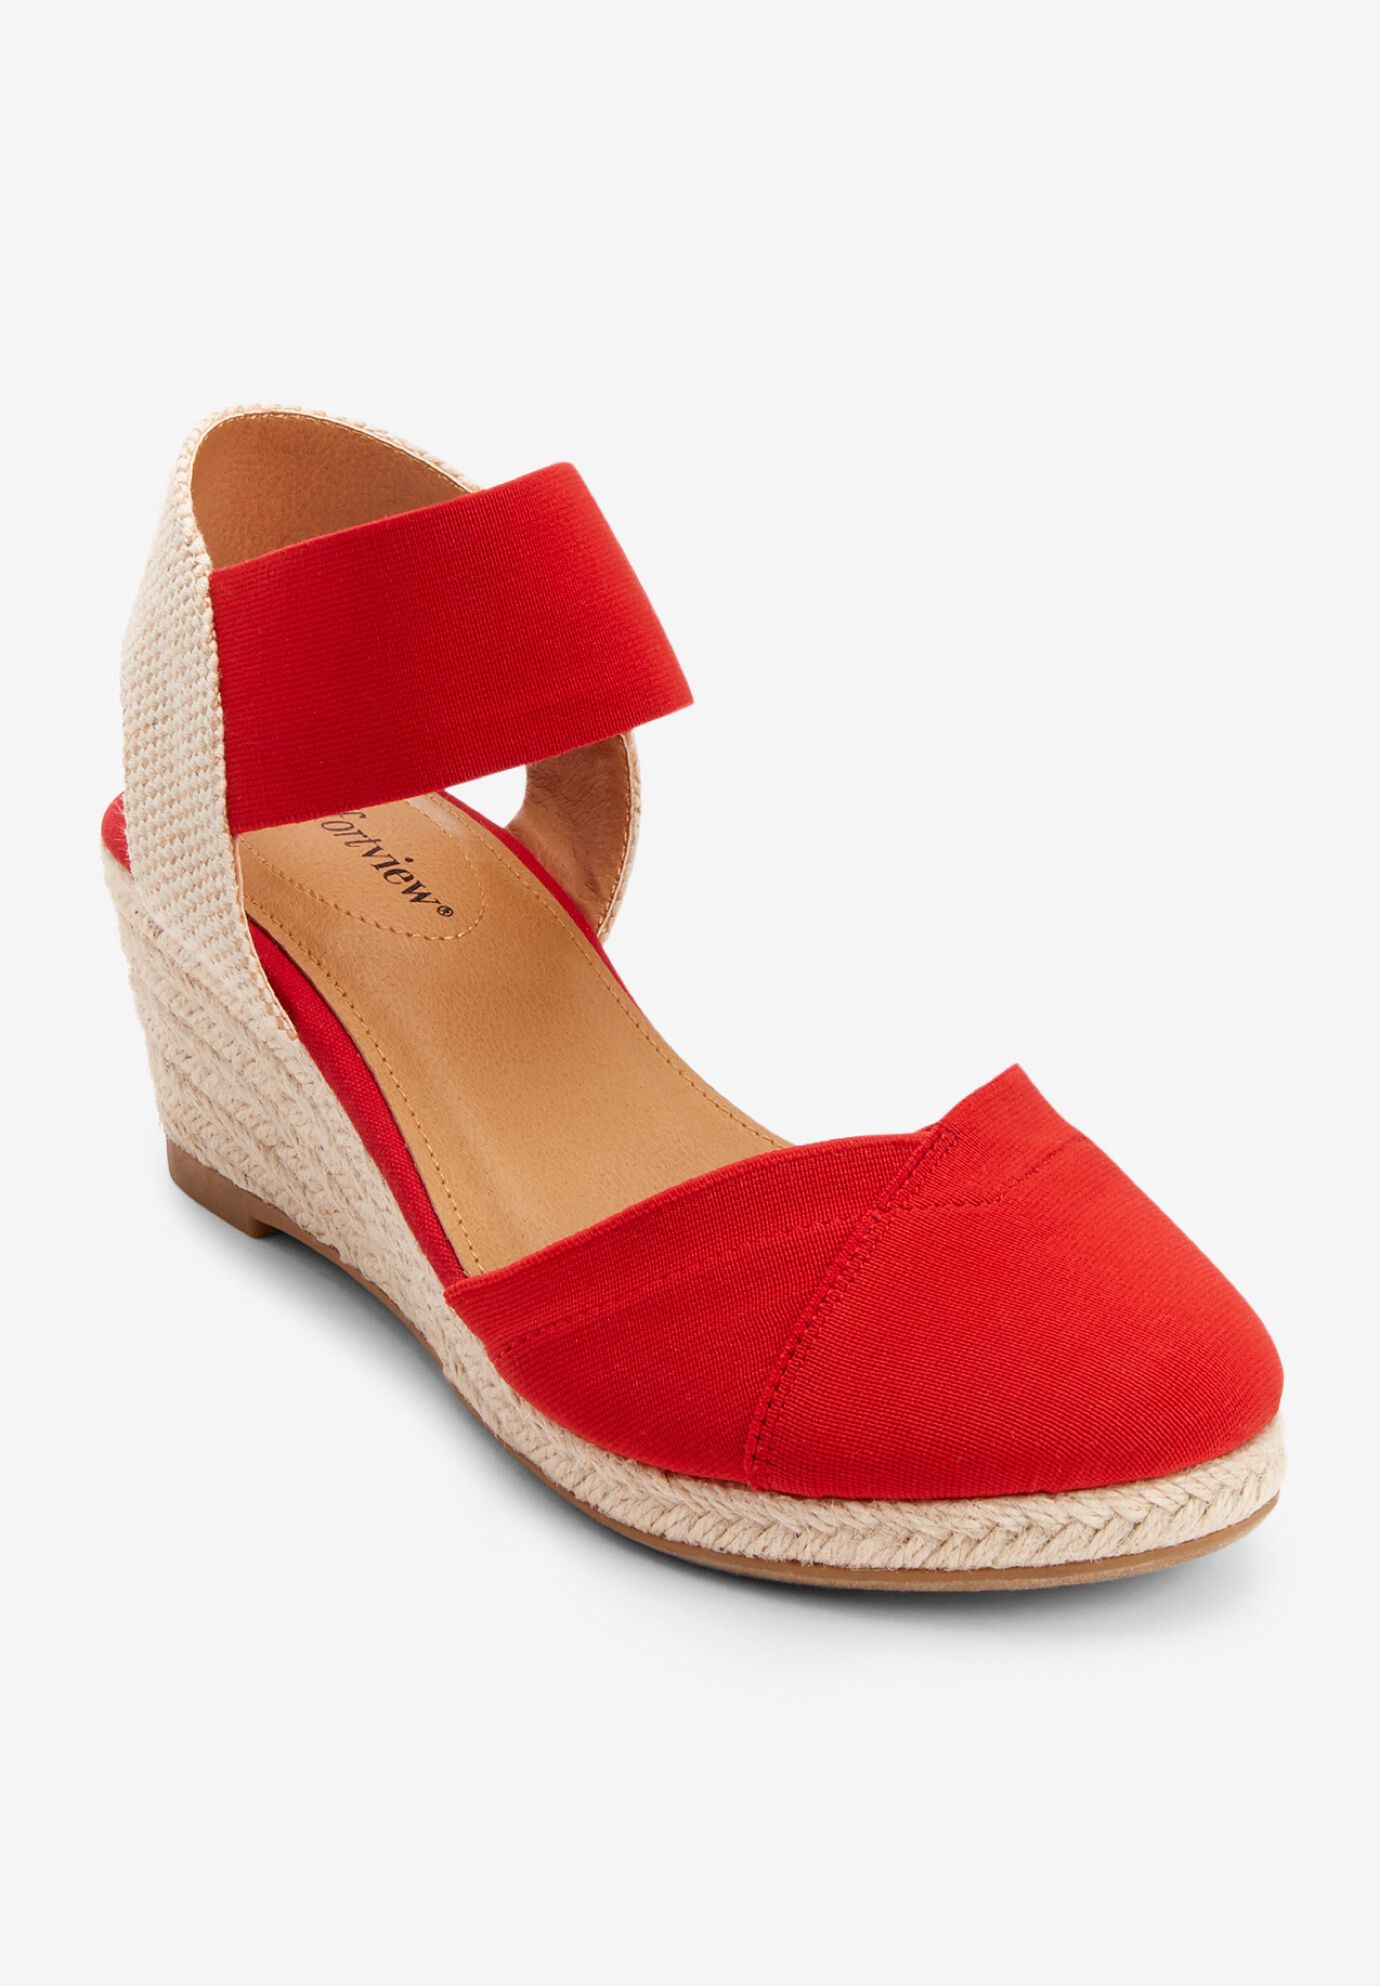 wide width closed toe wedges